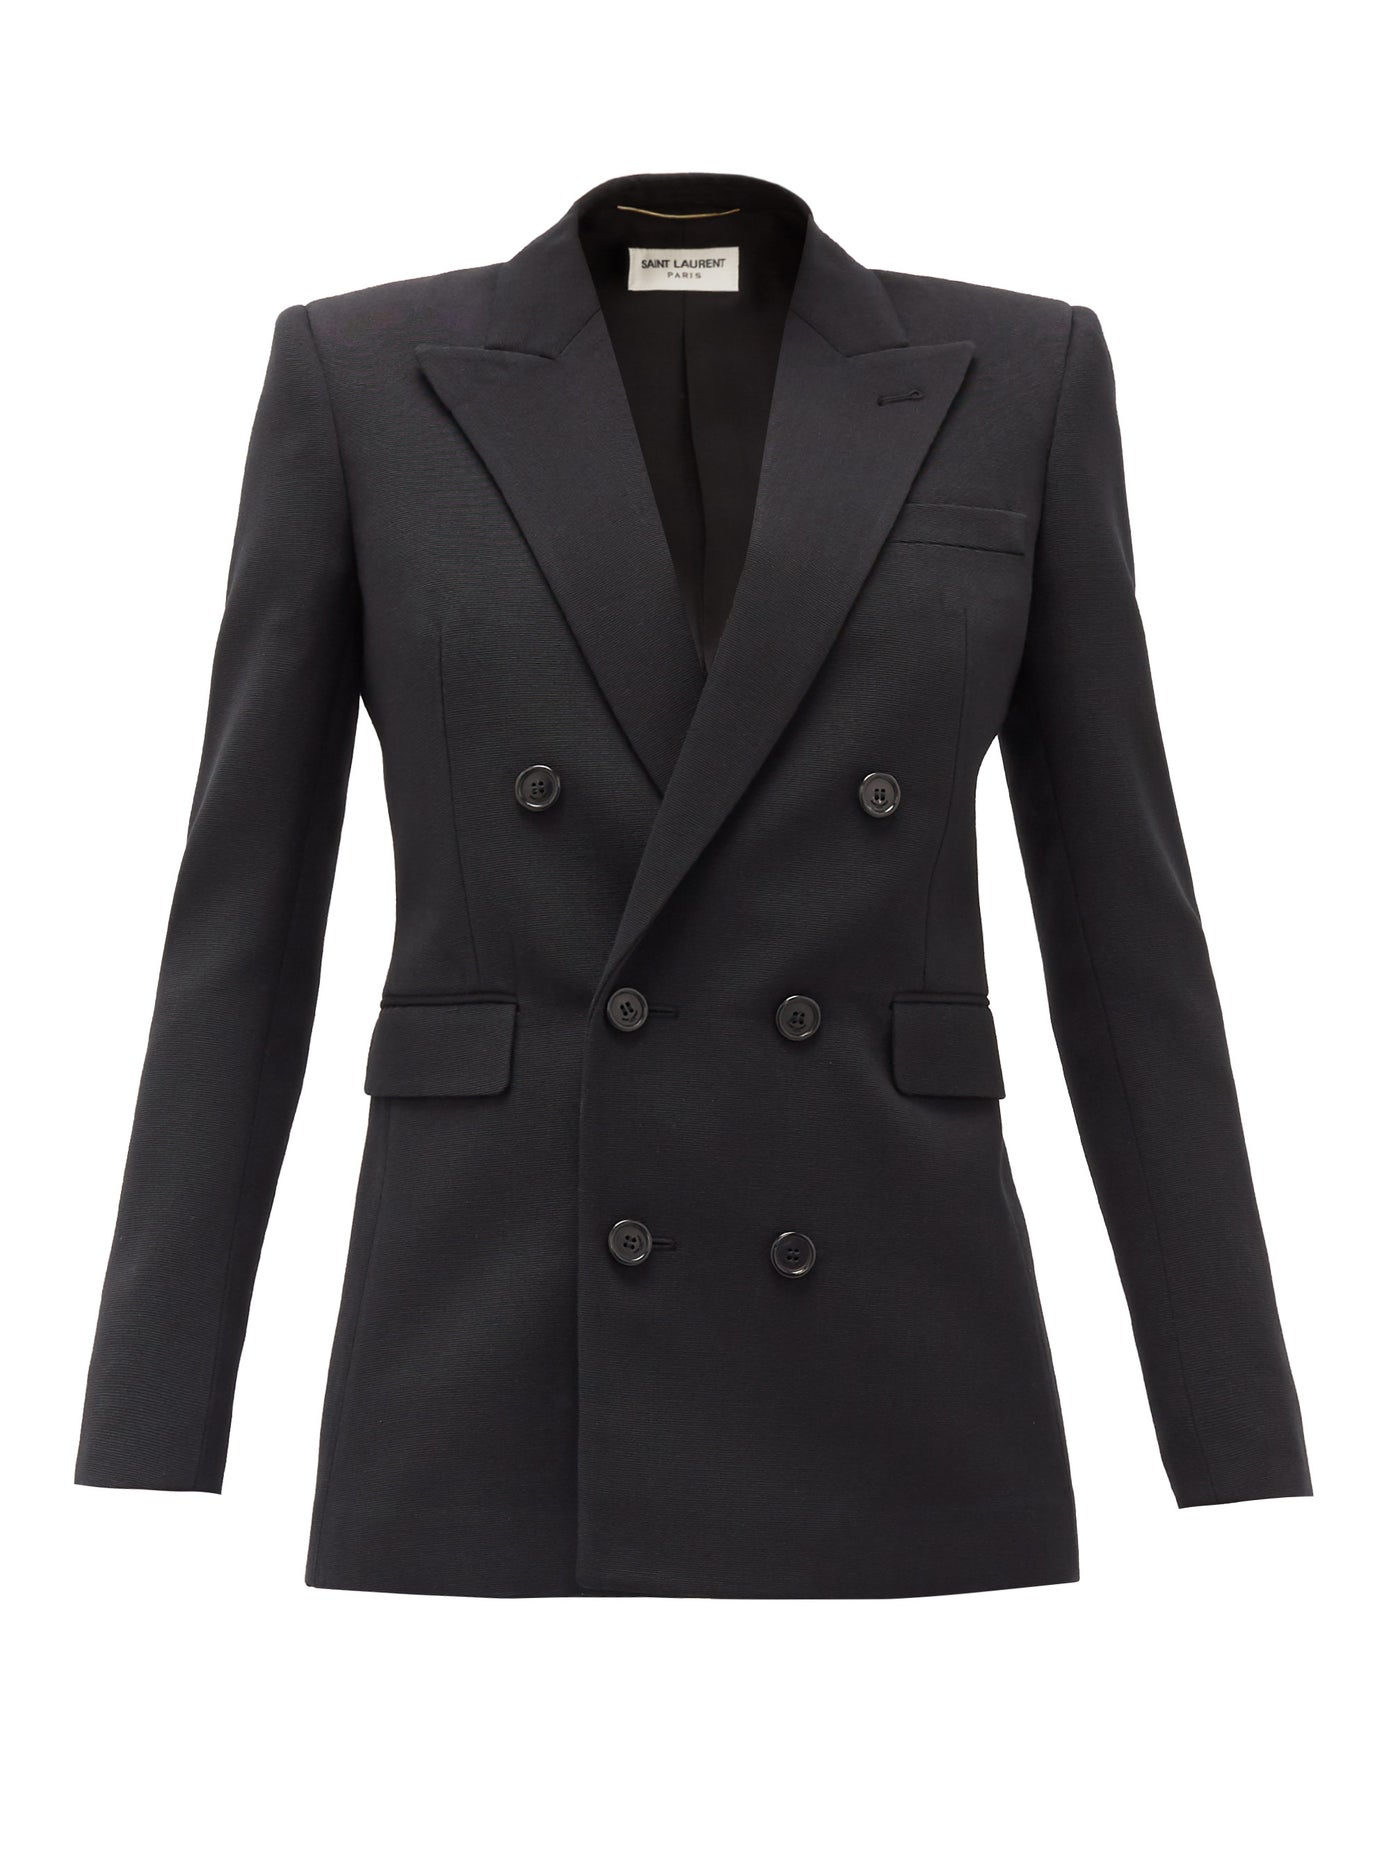 Saint Laurent - Double-Breasted Wool-Faille Blazer | ABOUT ICONS